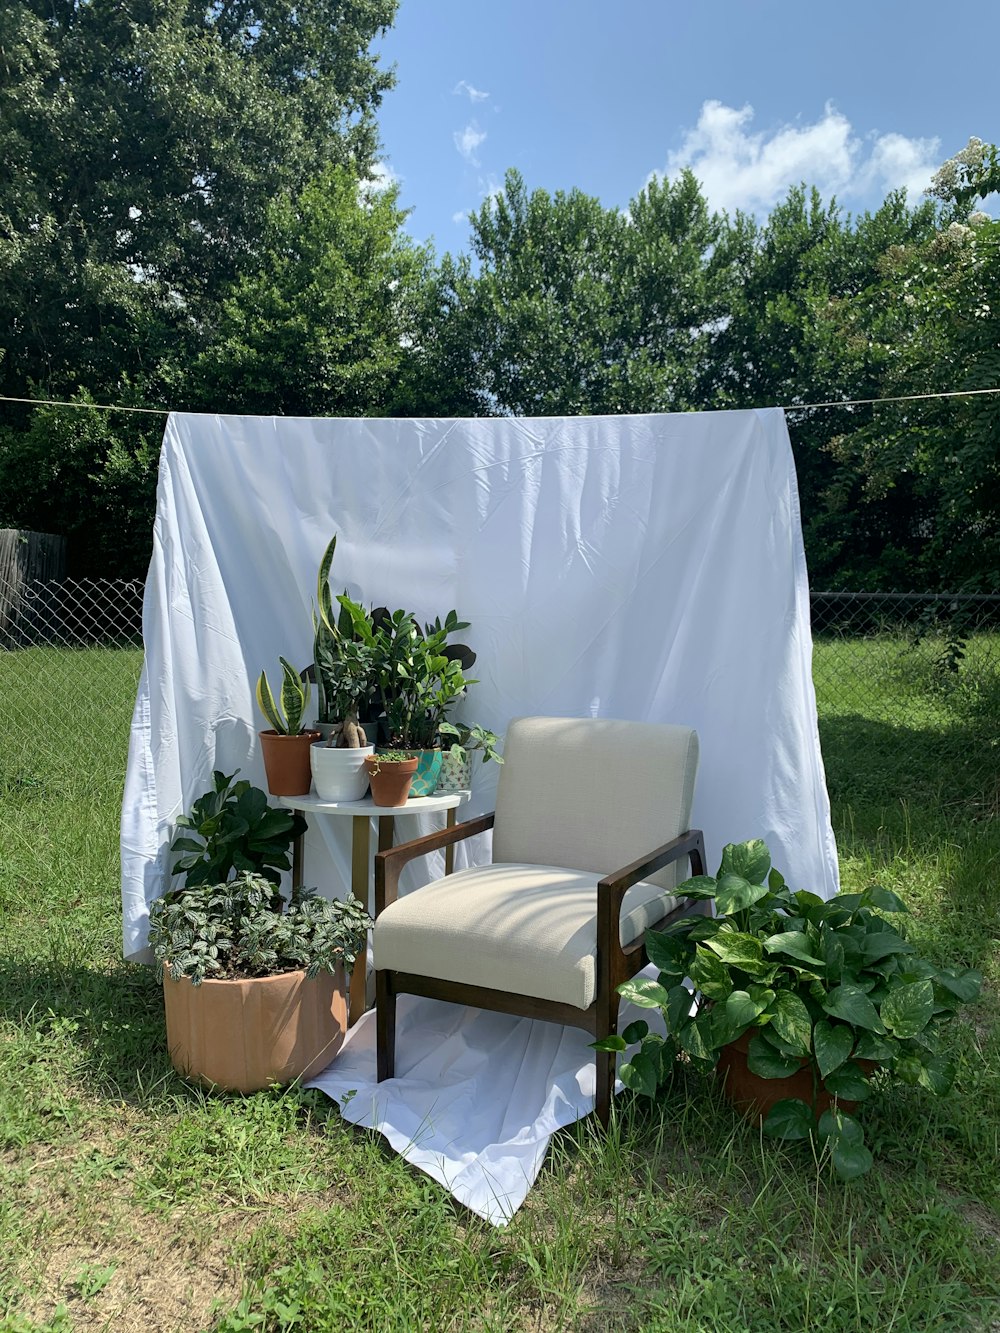 a chair sitting in the grass next to a table with potted plants